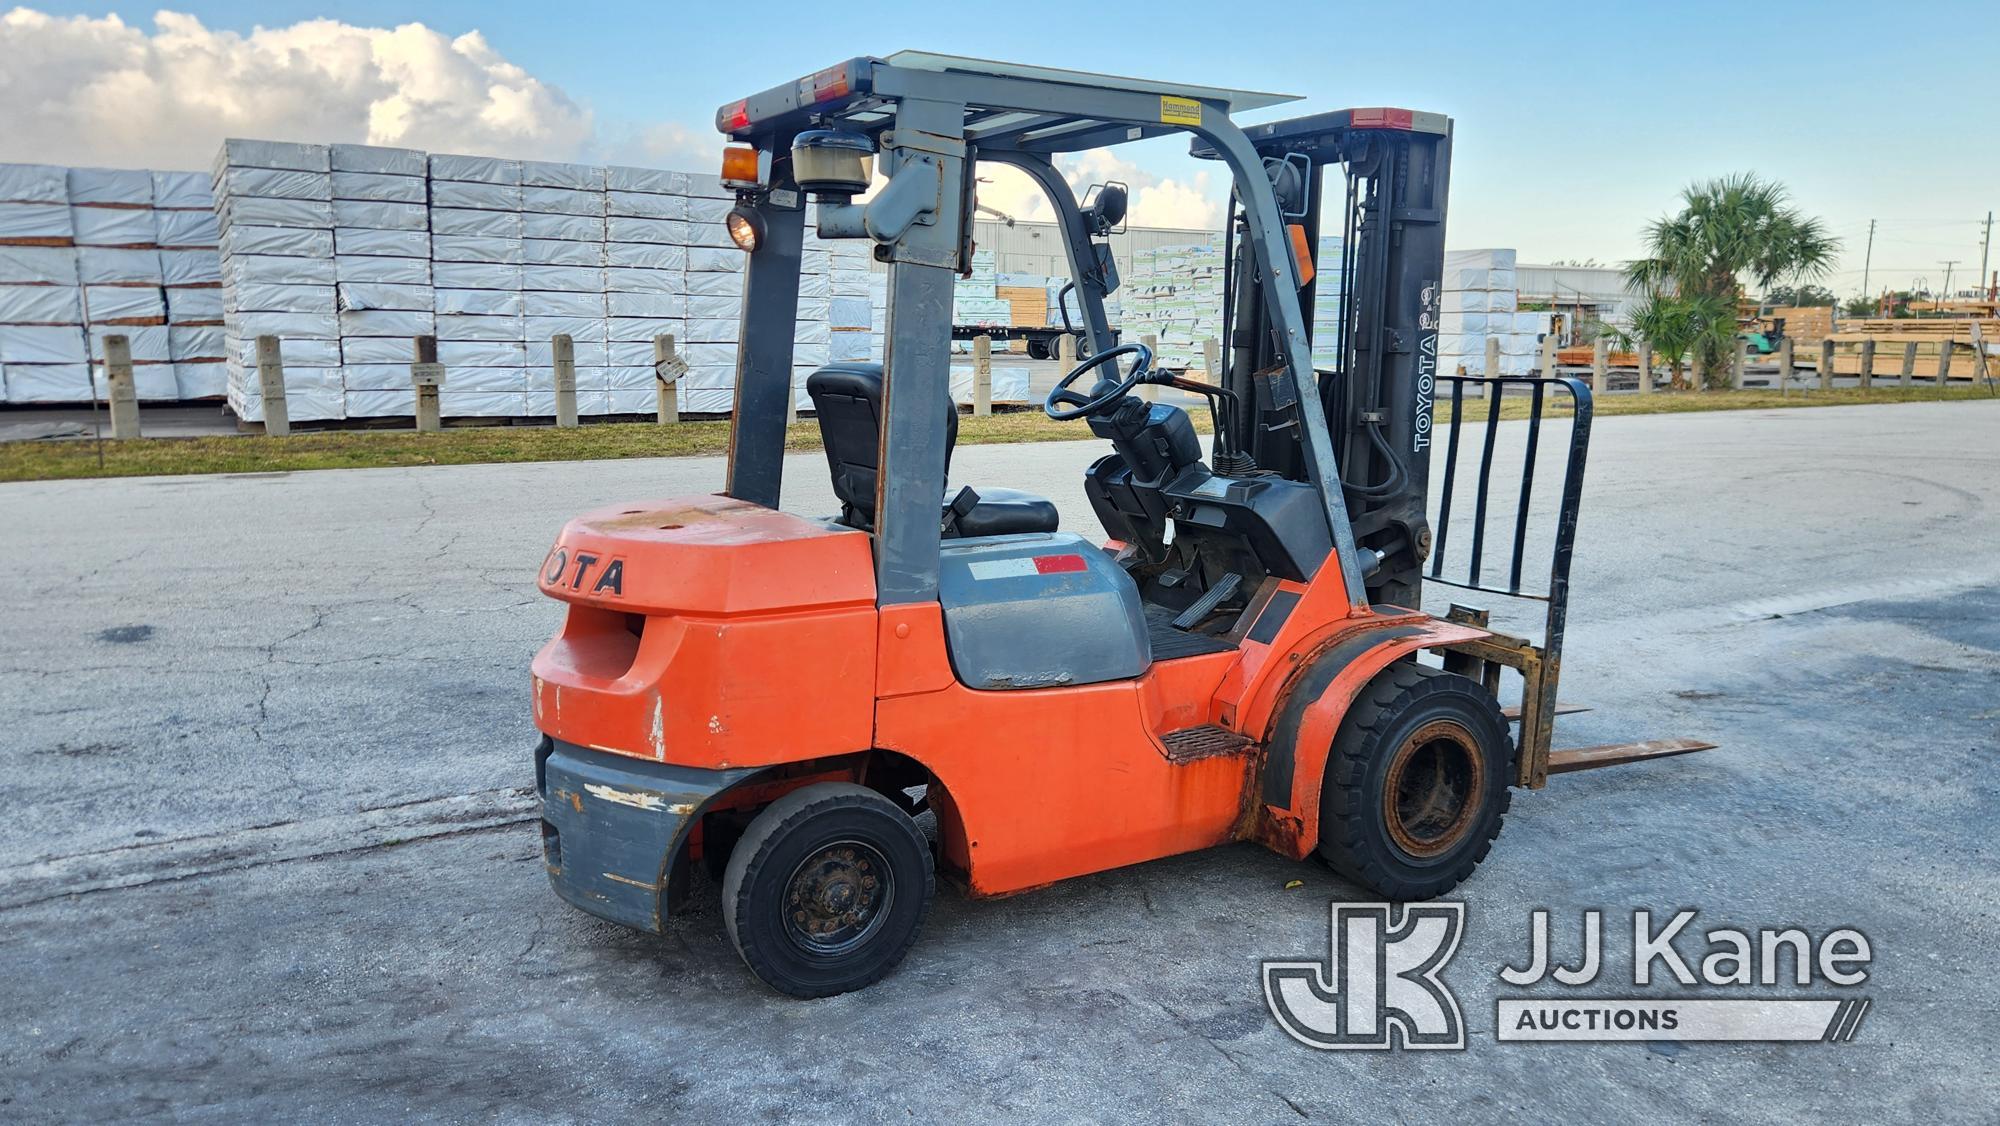 (Riviera Beach, FL) Toyota 7FDU25 Pneumatic Tired Forklift, Loading Assistance Available Runs. Moves